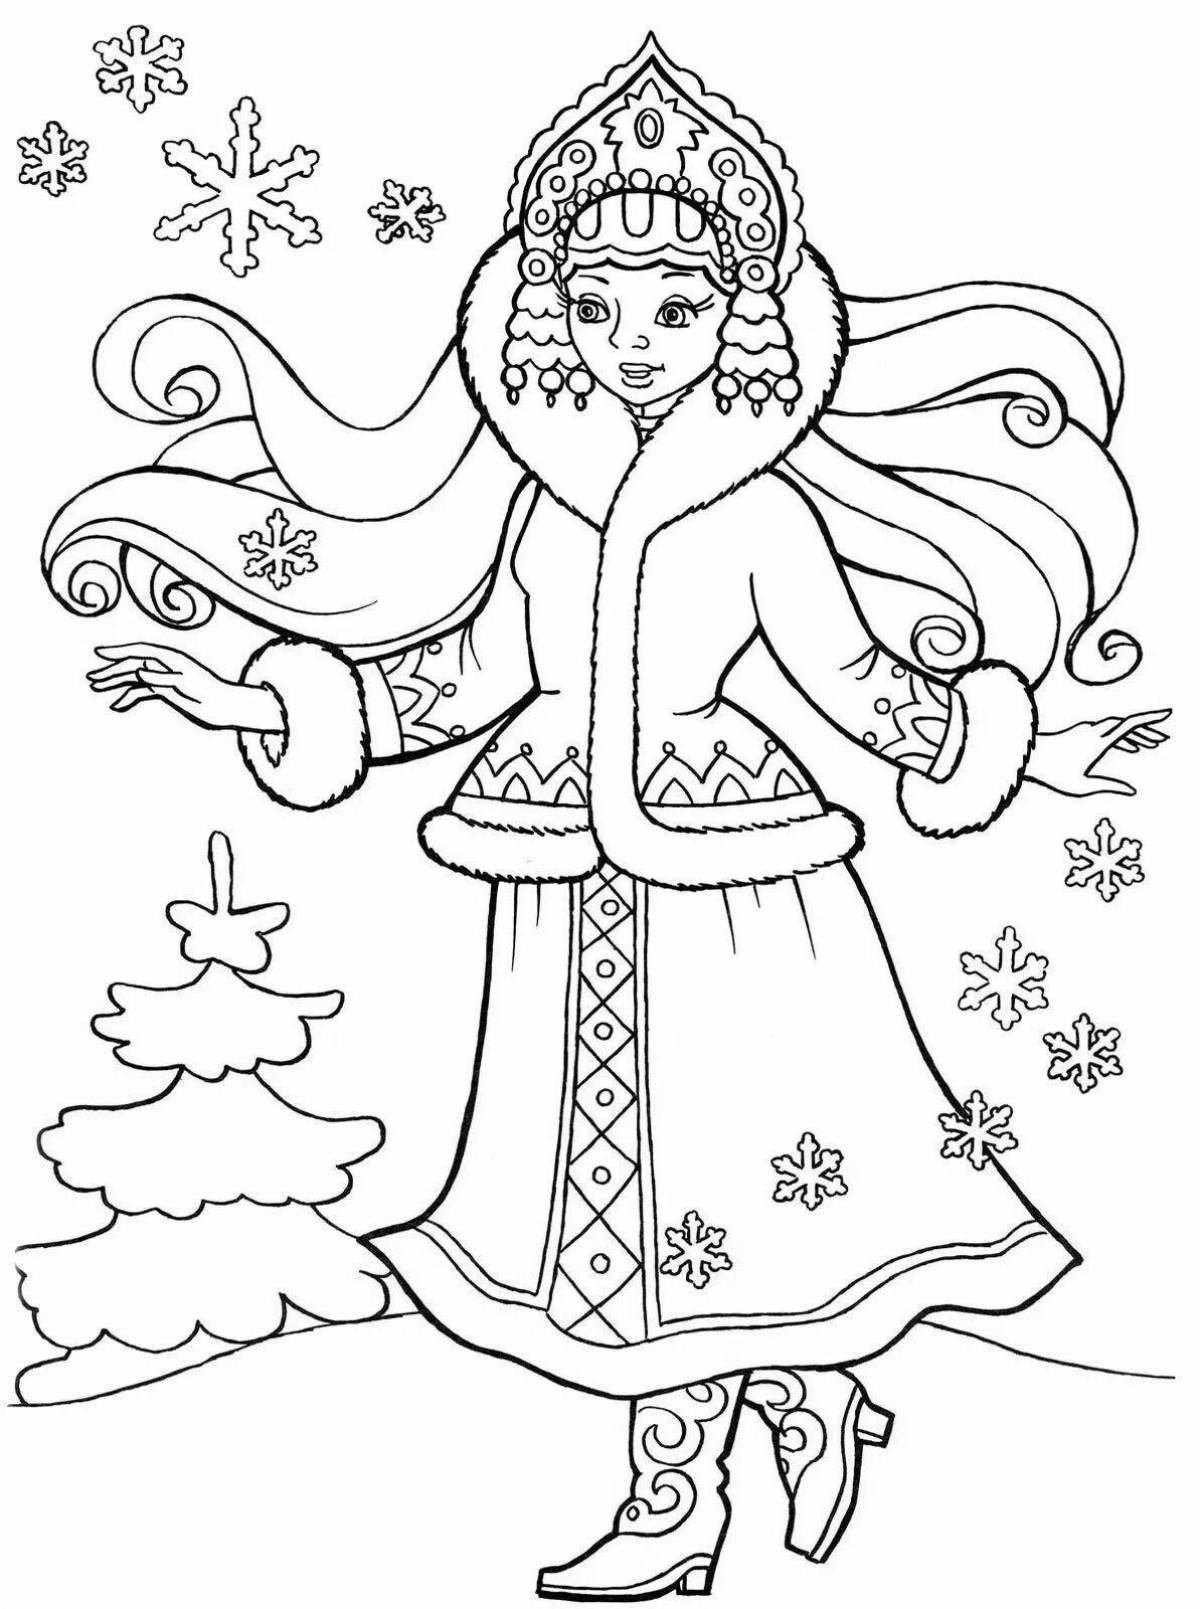 Incredible coloring drawing snow maiden